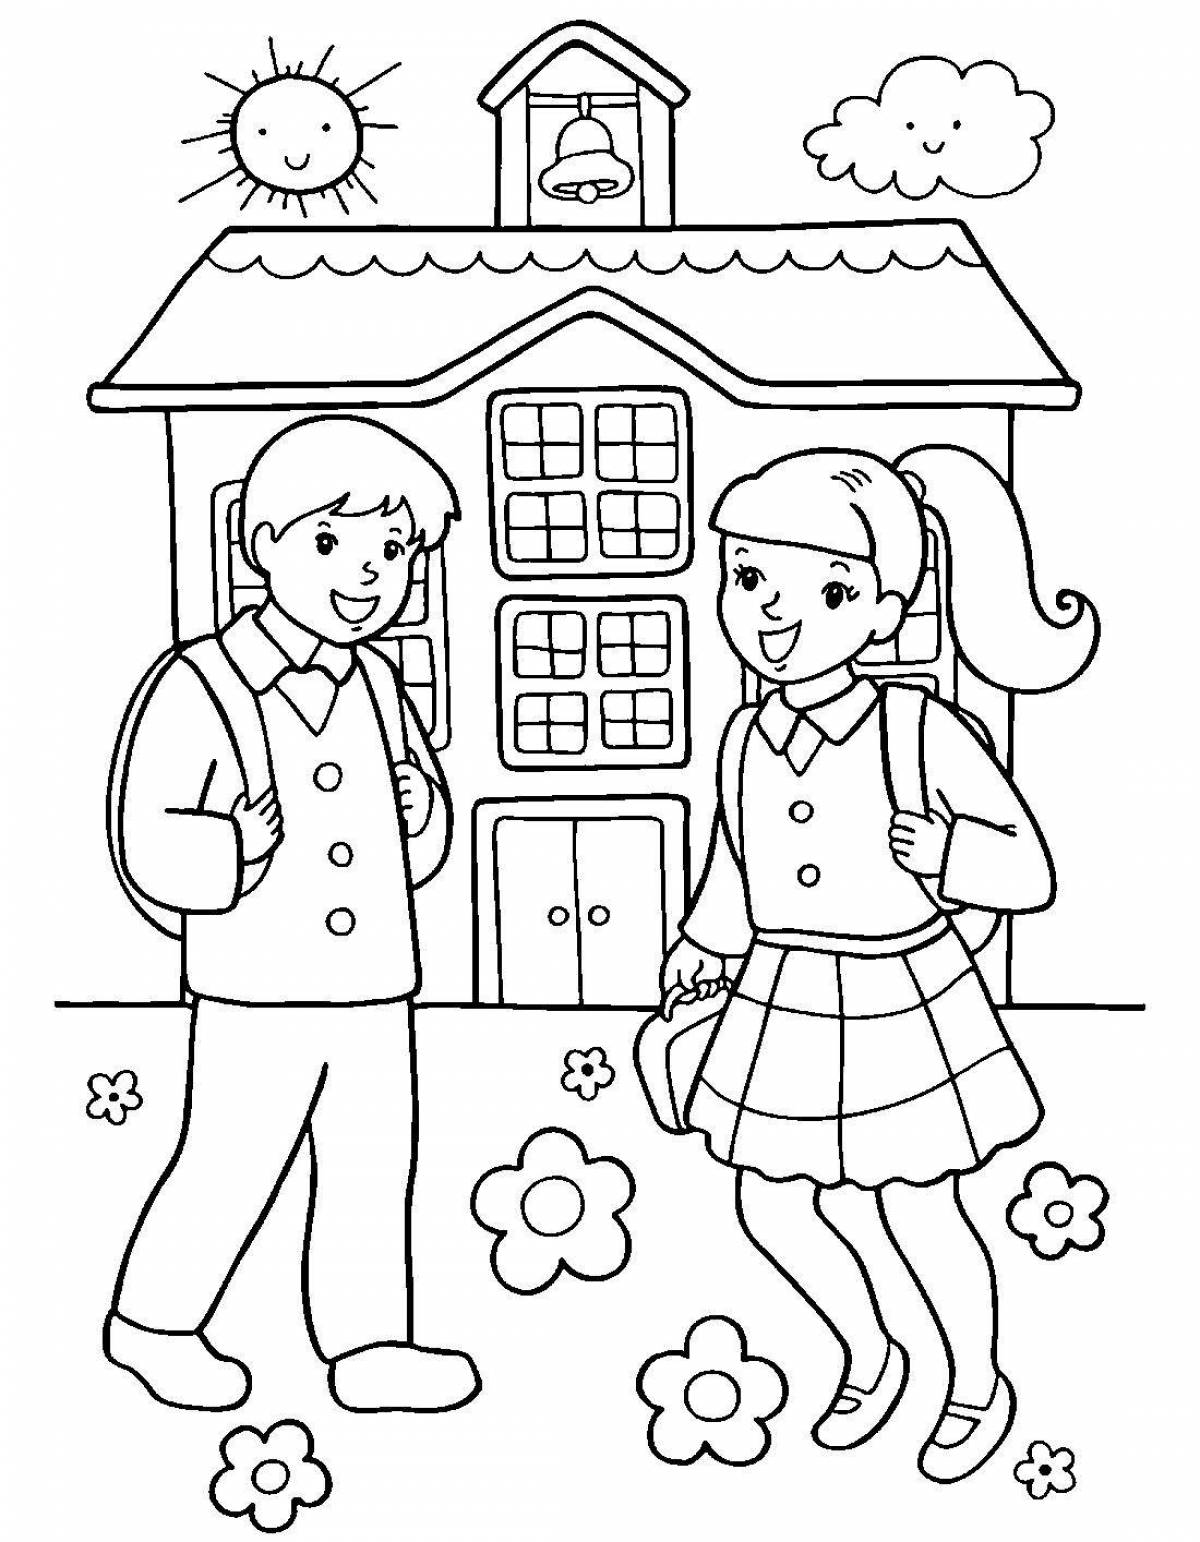 Colorful coloring book for 3rd graders